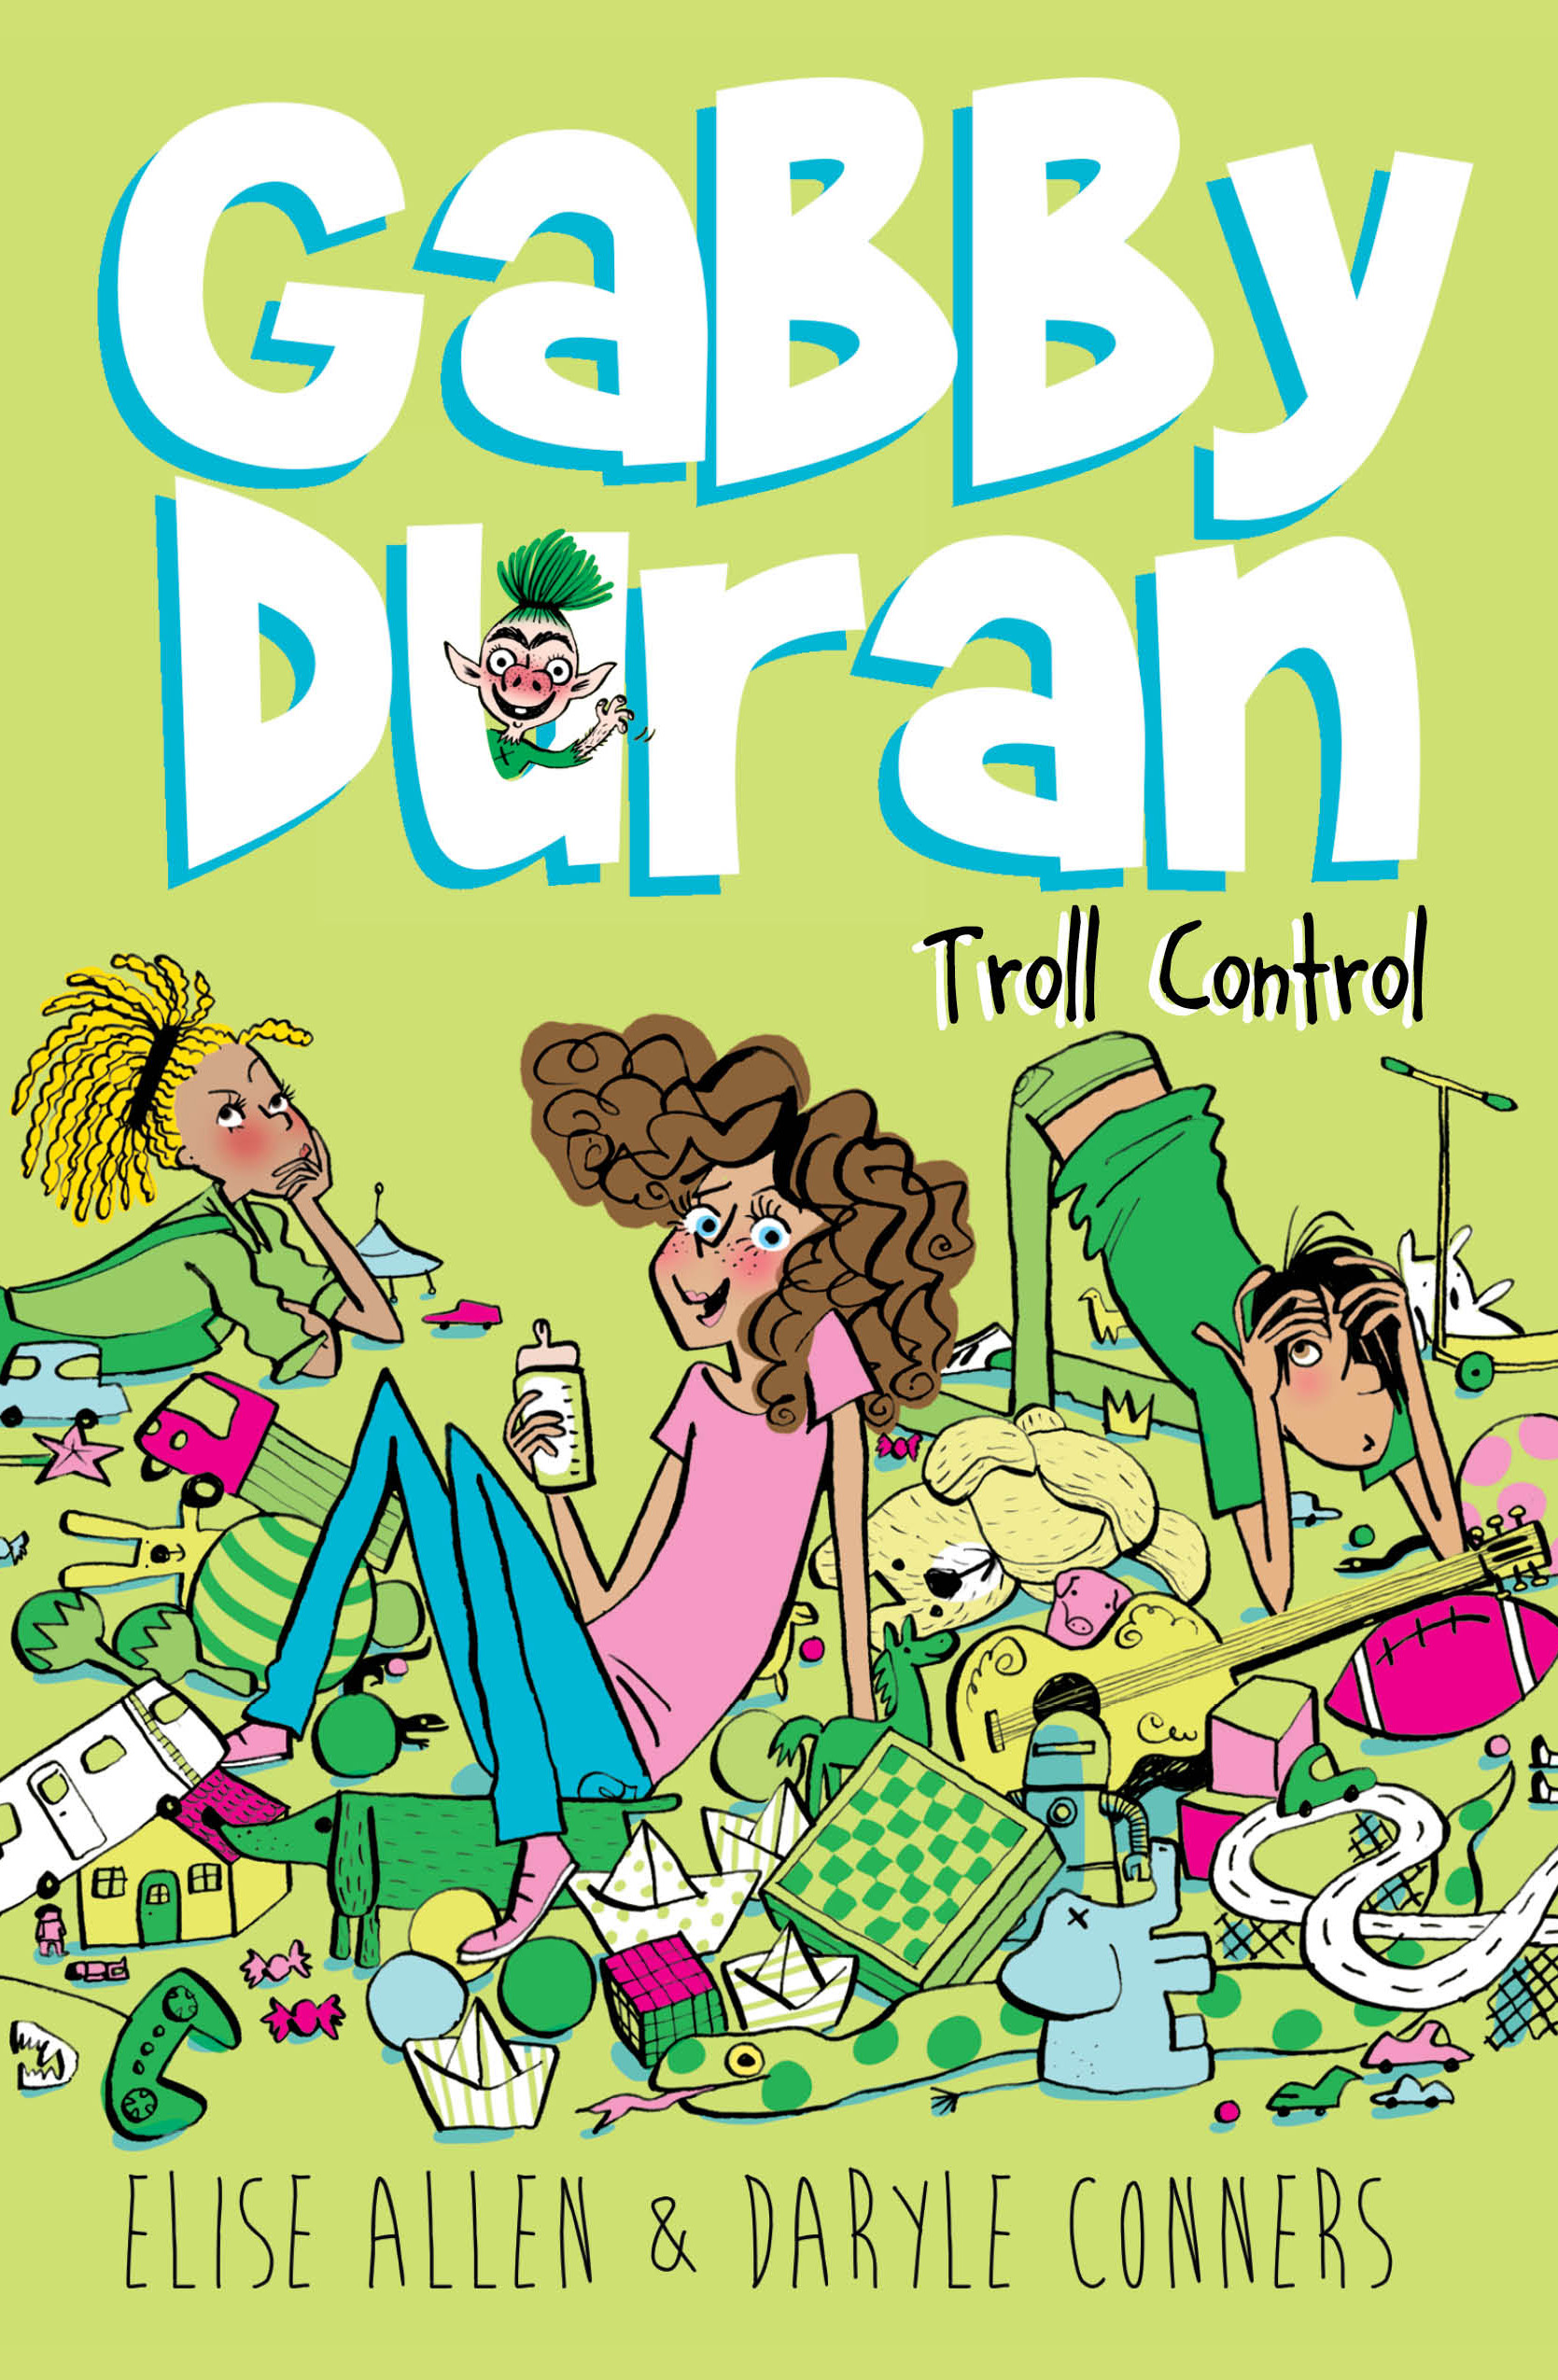 by　the　Channel,　Duran:　Conners,　Allen　Unsittables　Daryle　Gabby　Disney,　Control　Duran　and　Troll　Disney　Elise　Gabby　Books